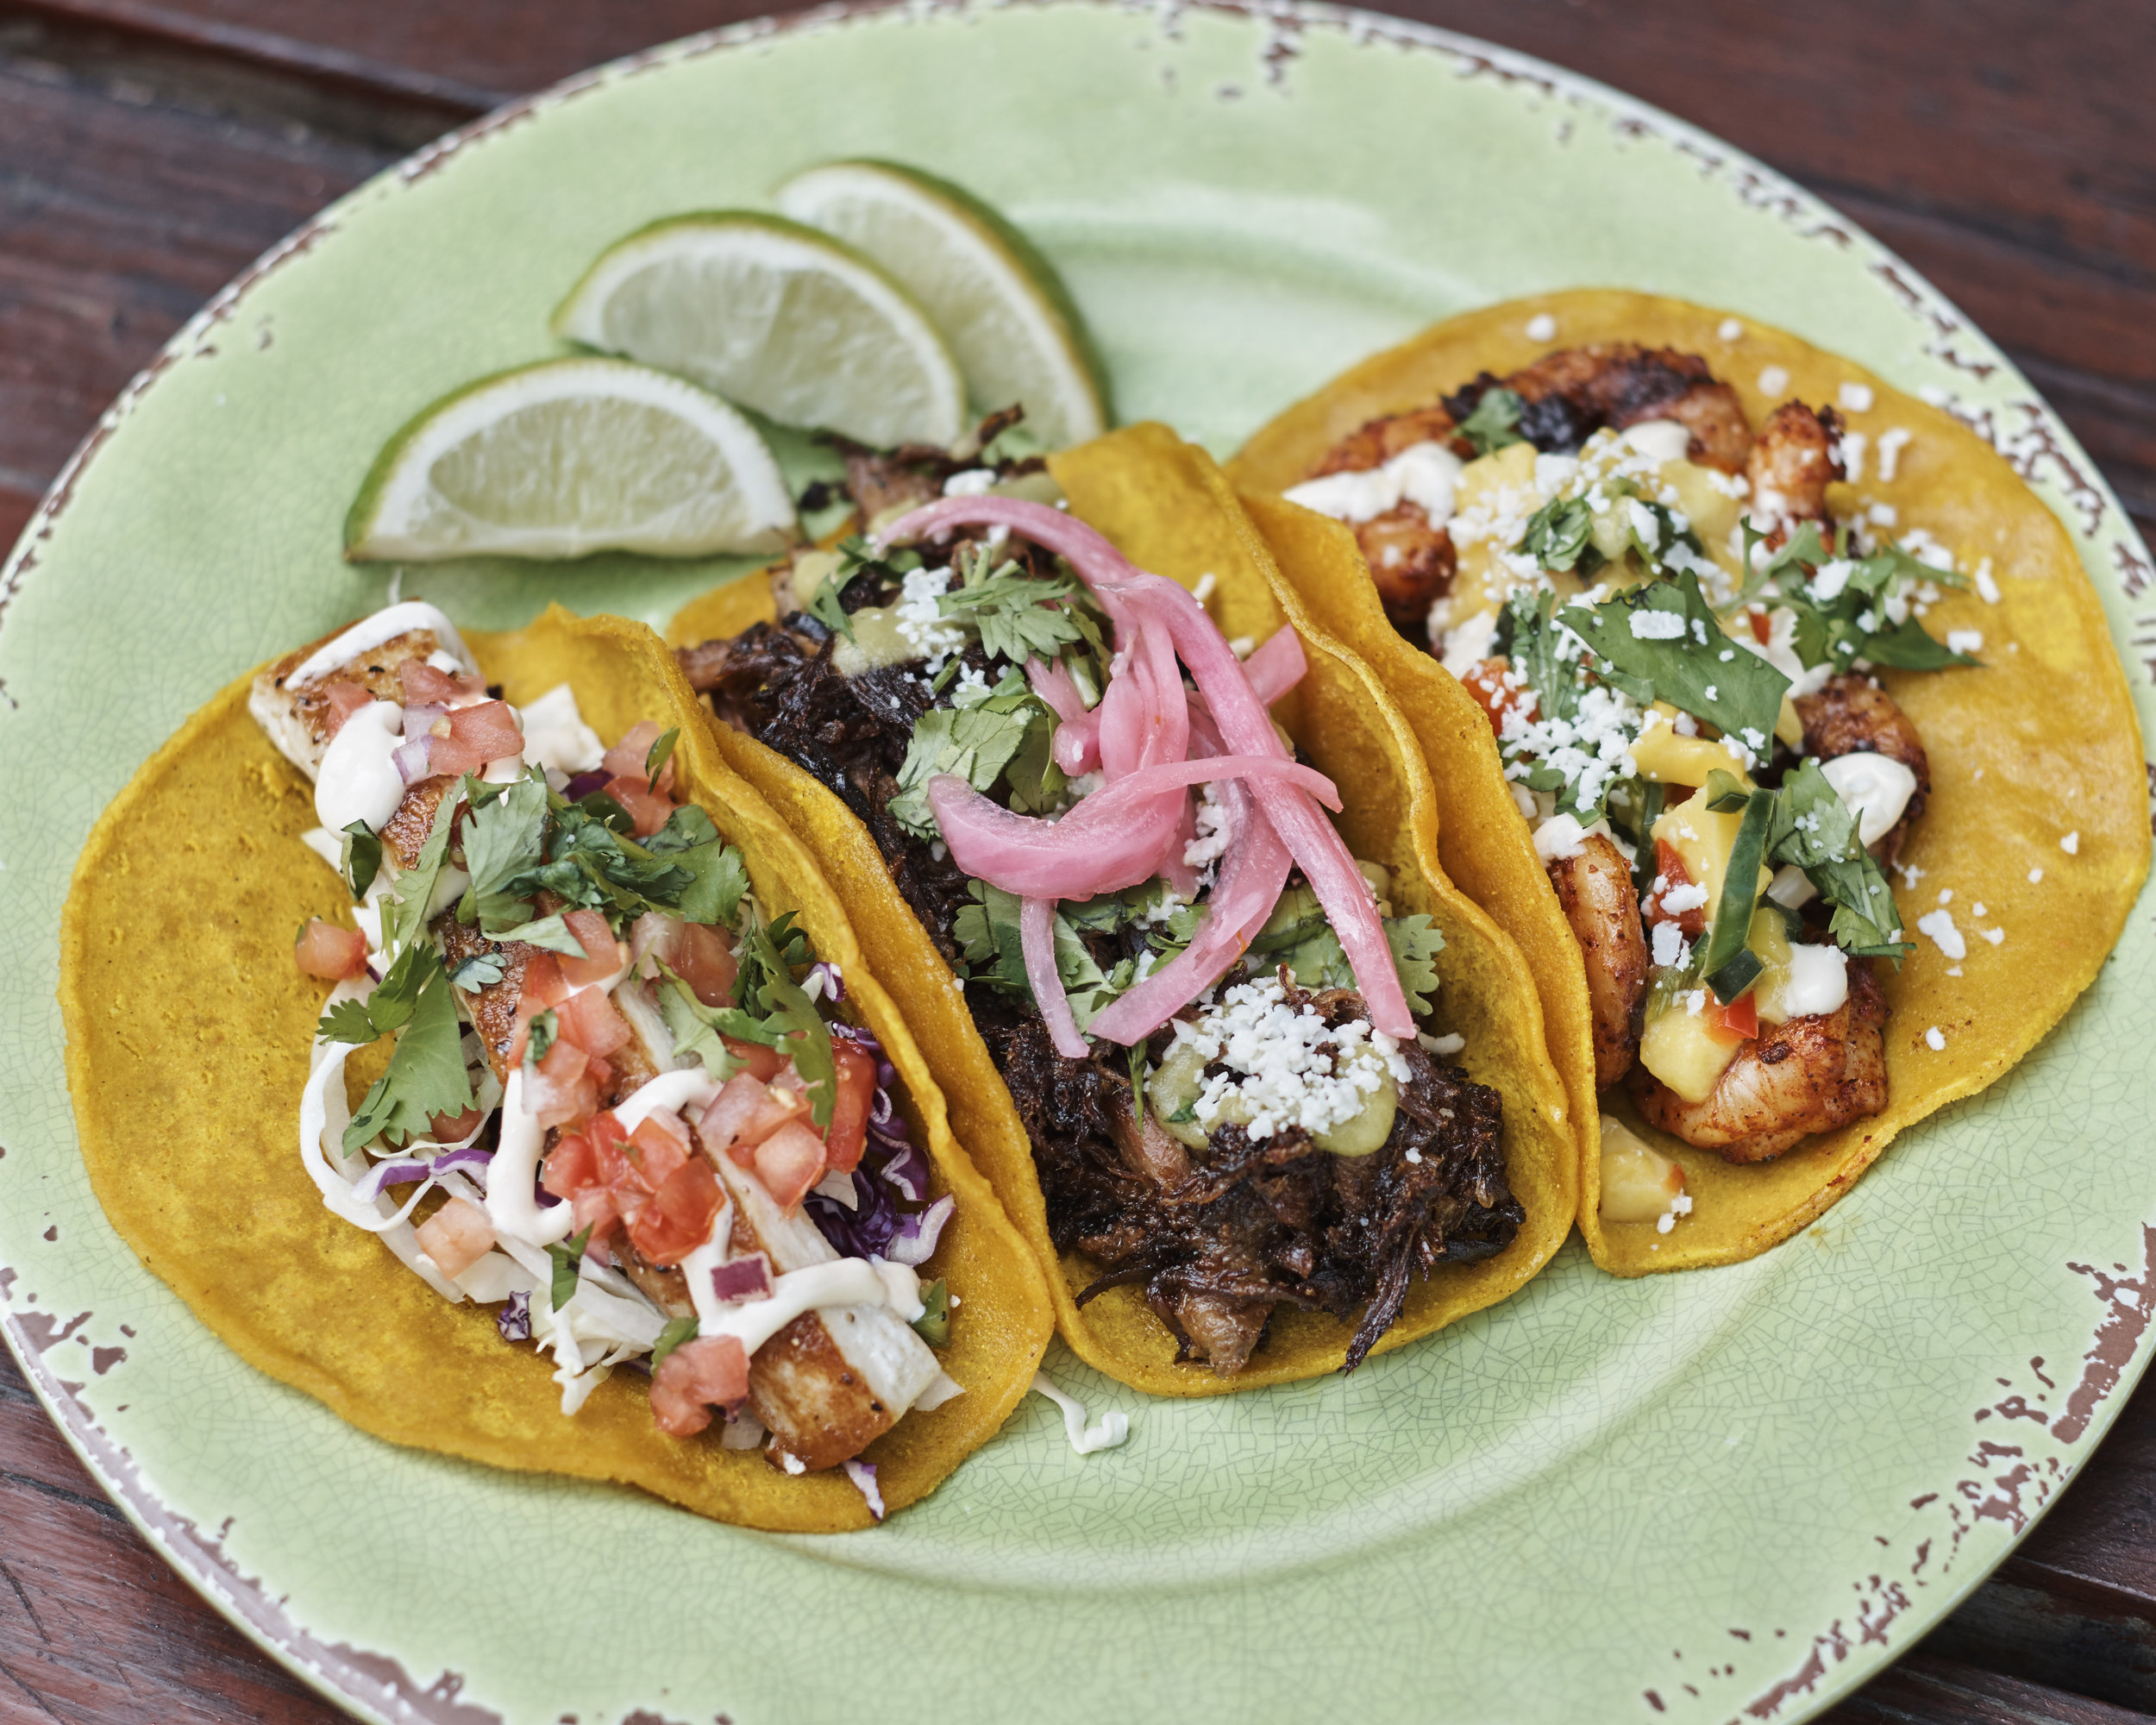  "Delicious and Authentic Birria Taco Meat Recipe: A Flavorful Culinary Journey"